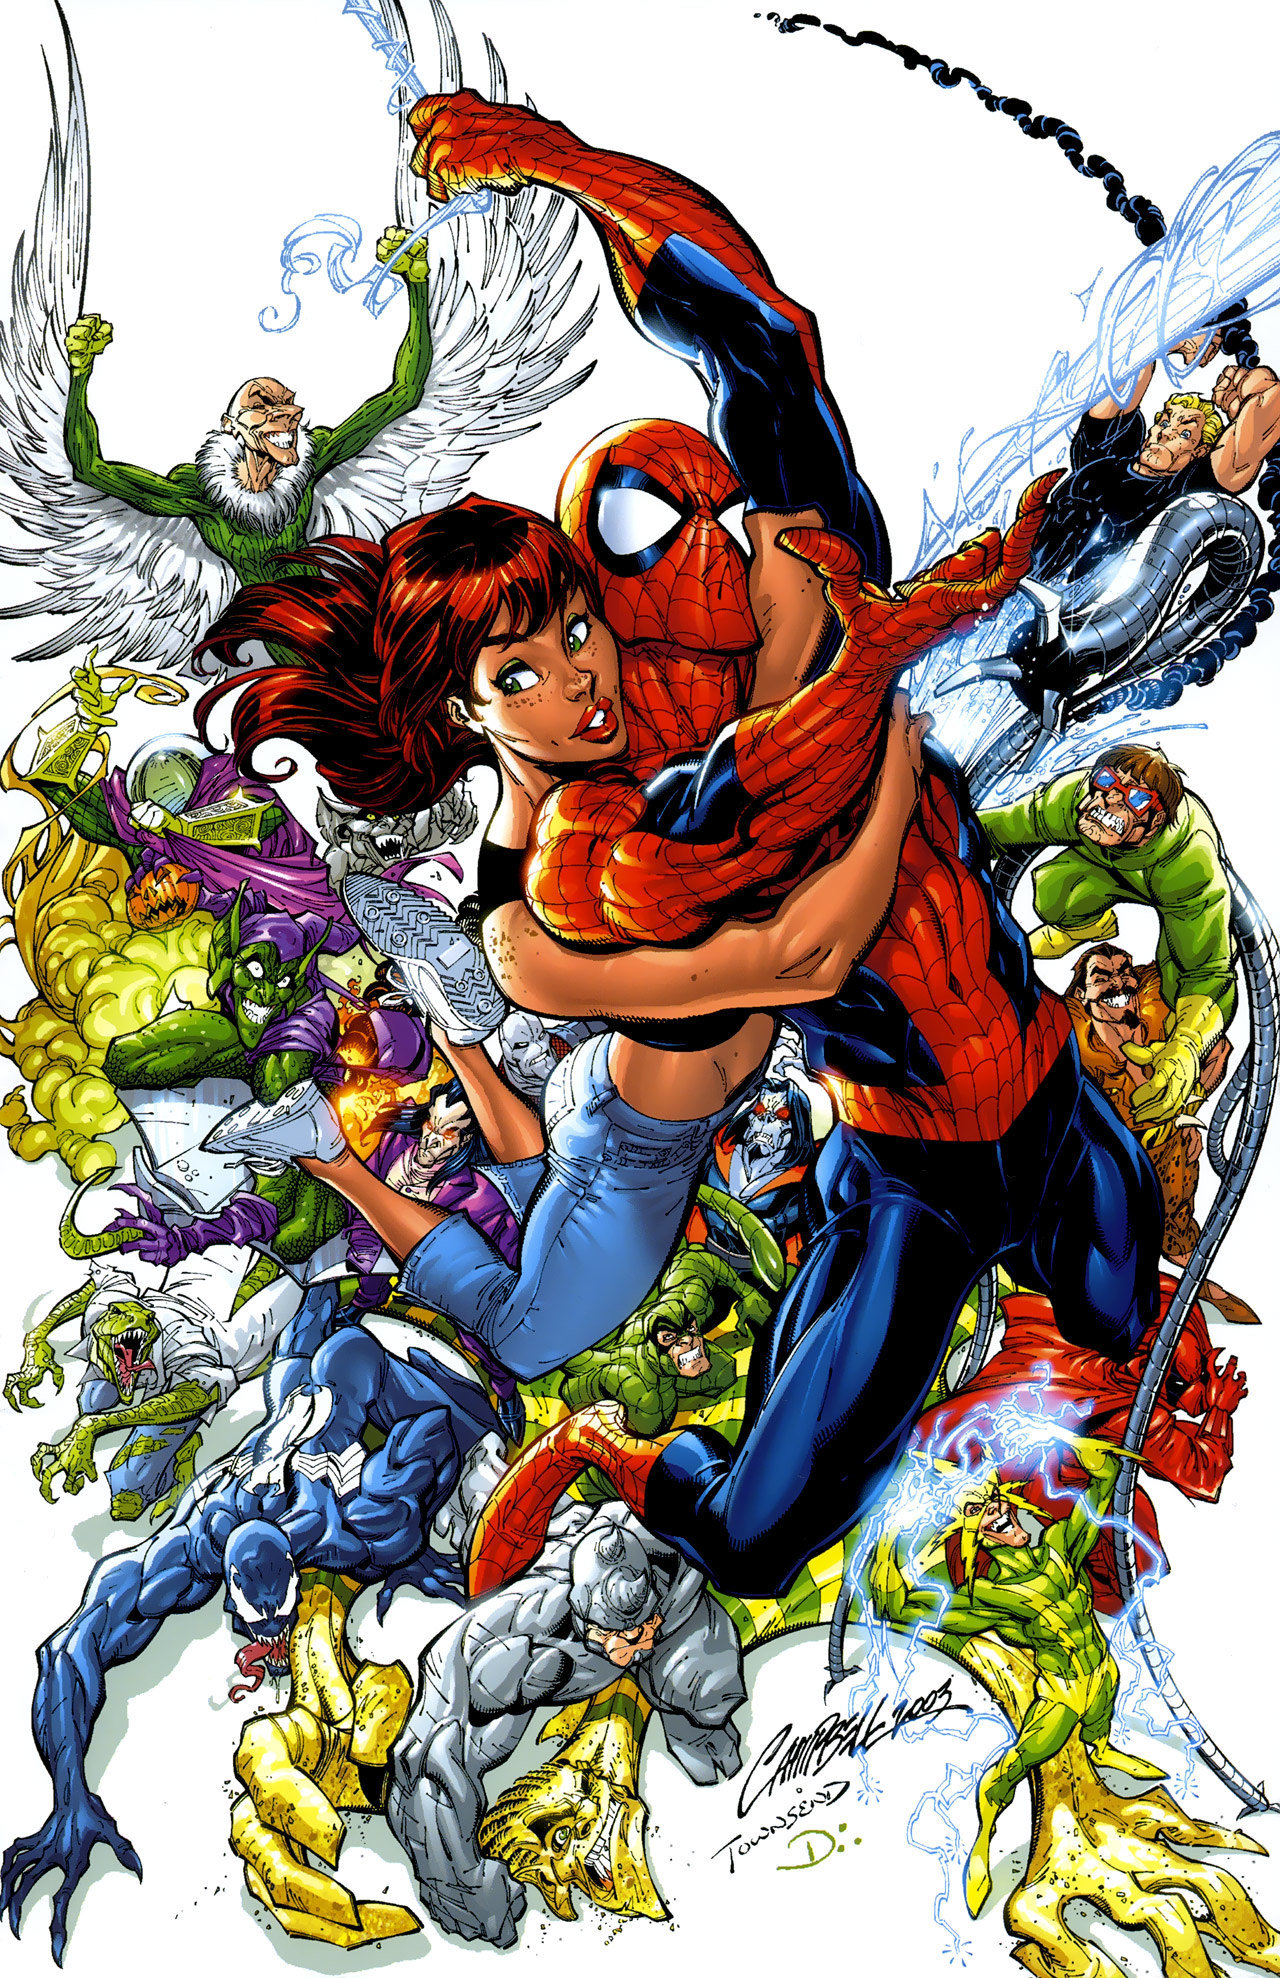 Spider Man Vs Sinister Six Poster Book | Read Spider Man Vs Sinister Six  Poster Book comic online in high quality. Read Full Comic online for free -  Read comics online in